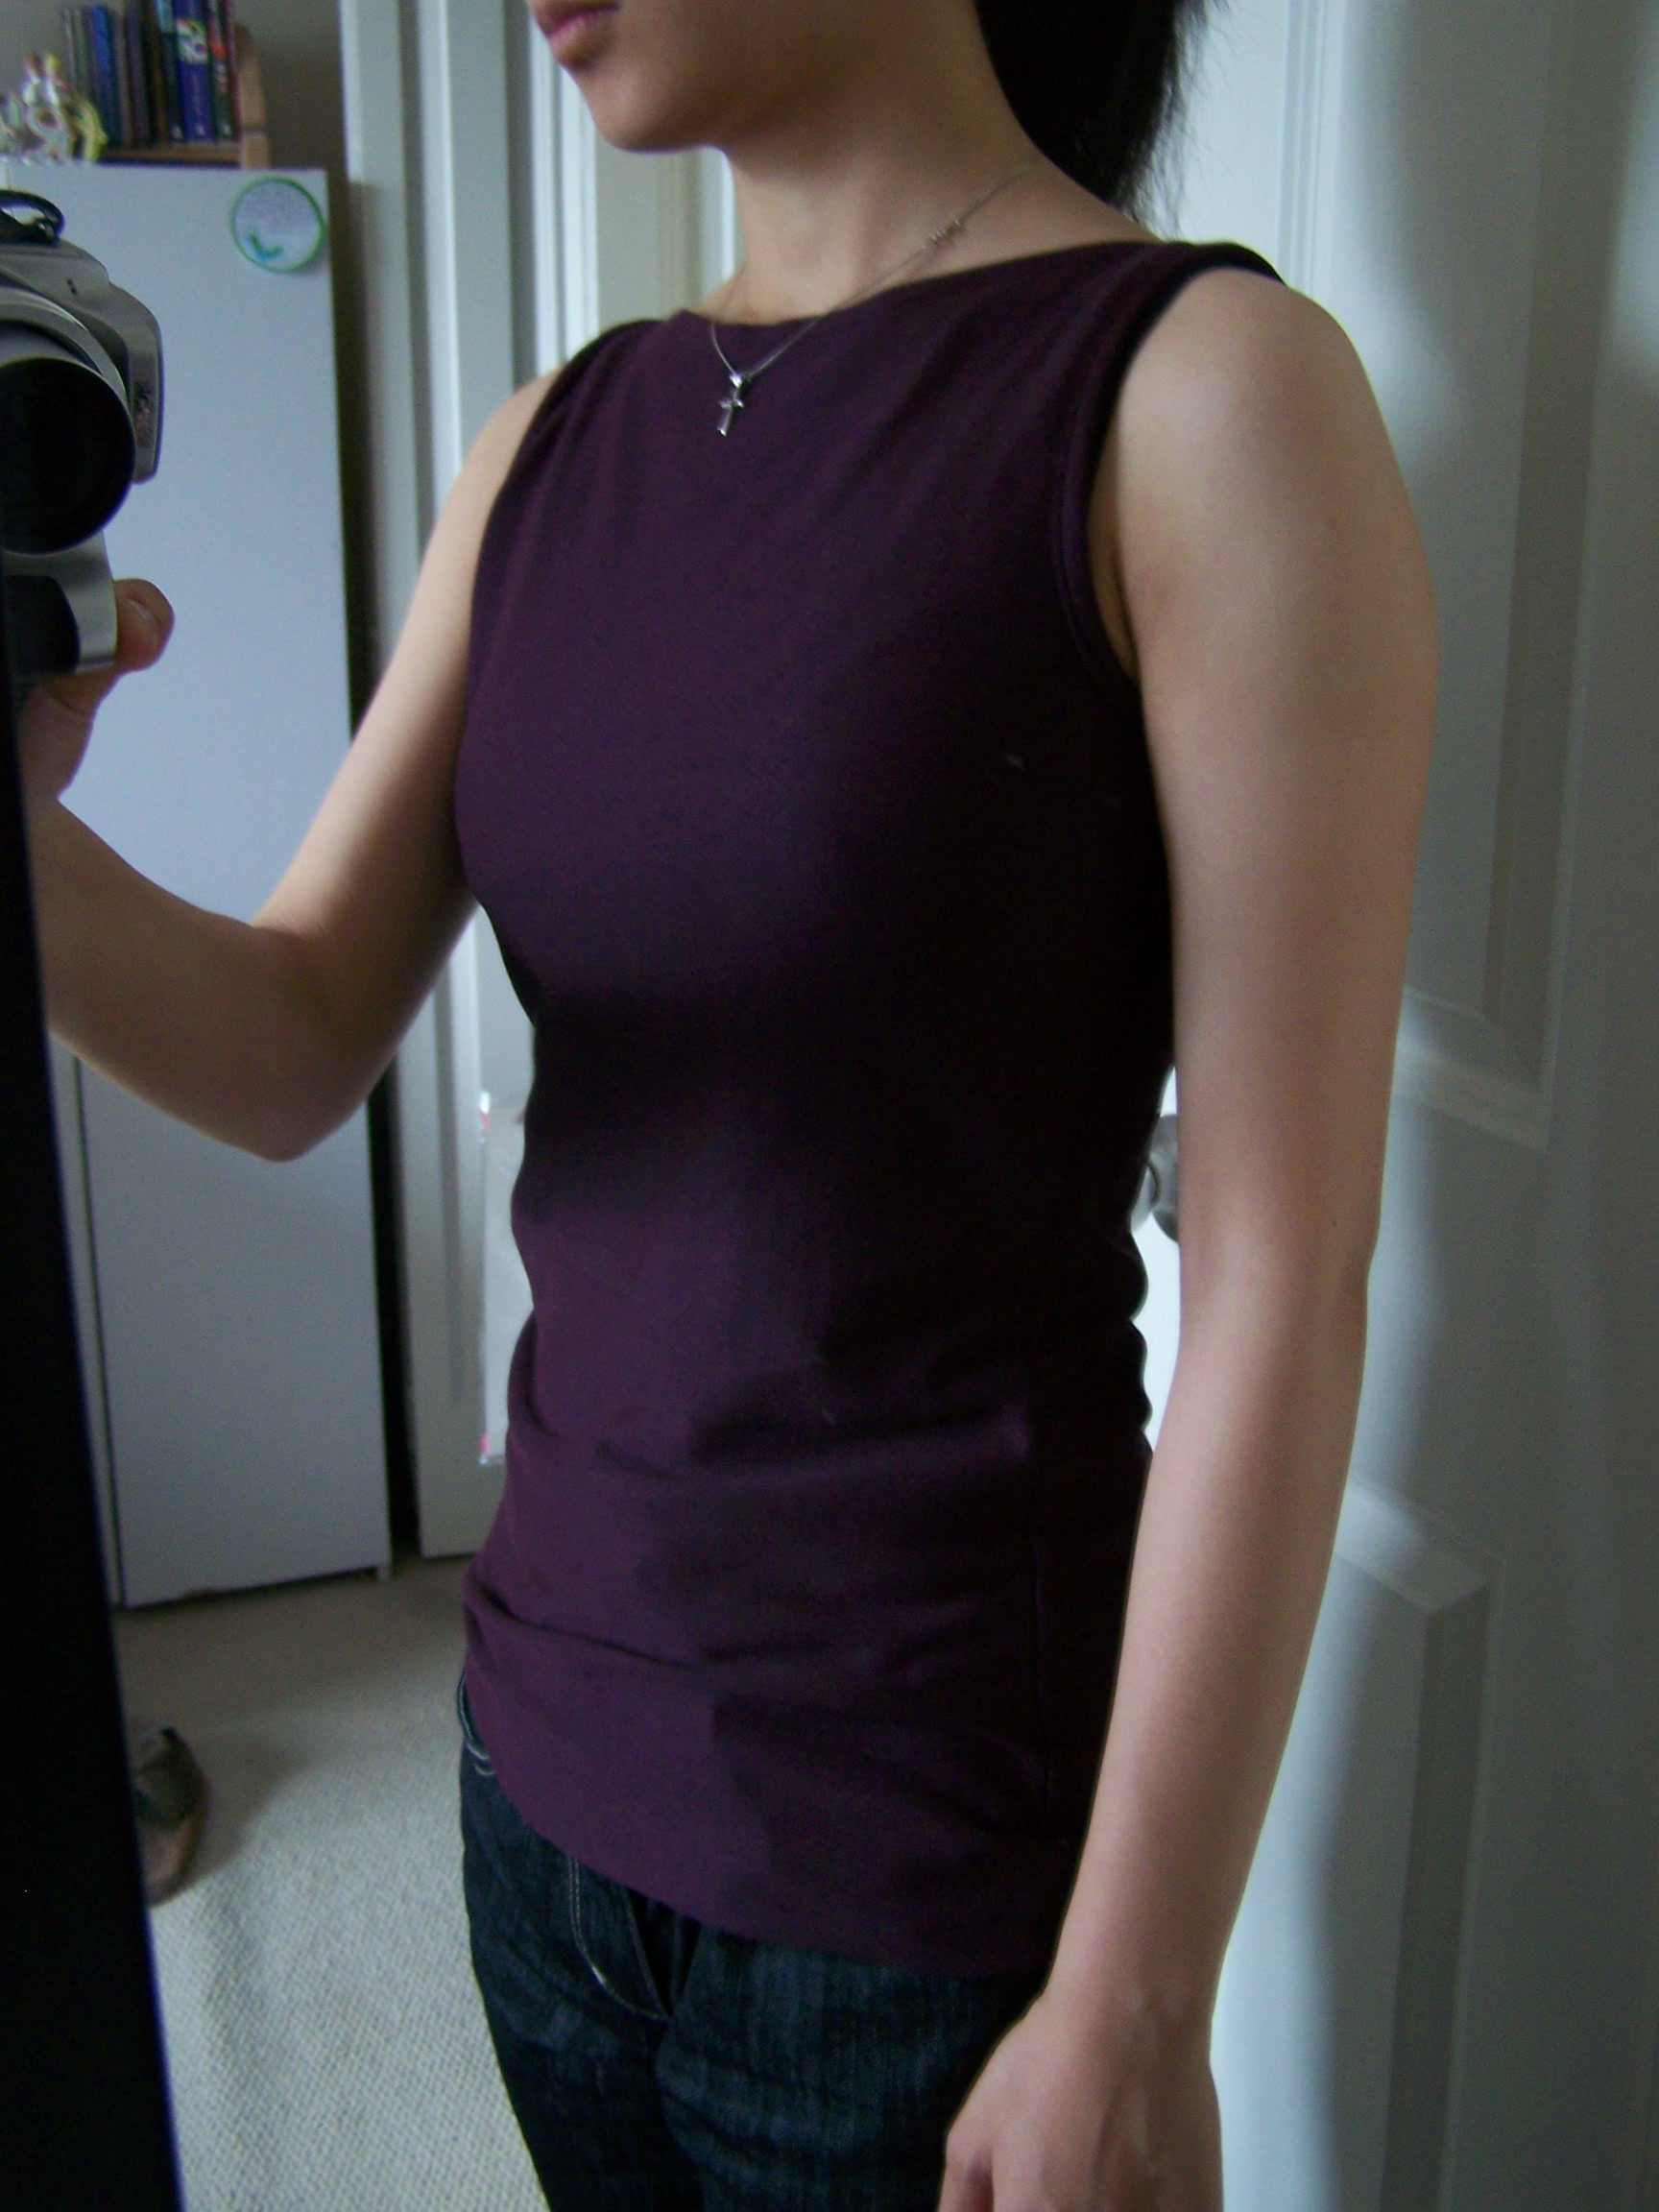 the fit of the tank top, baste stitch first along the sides and top 